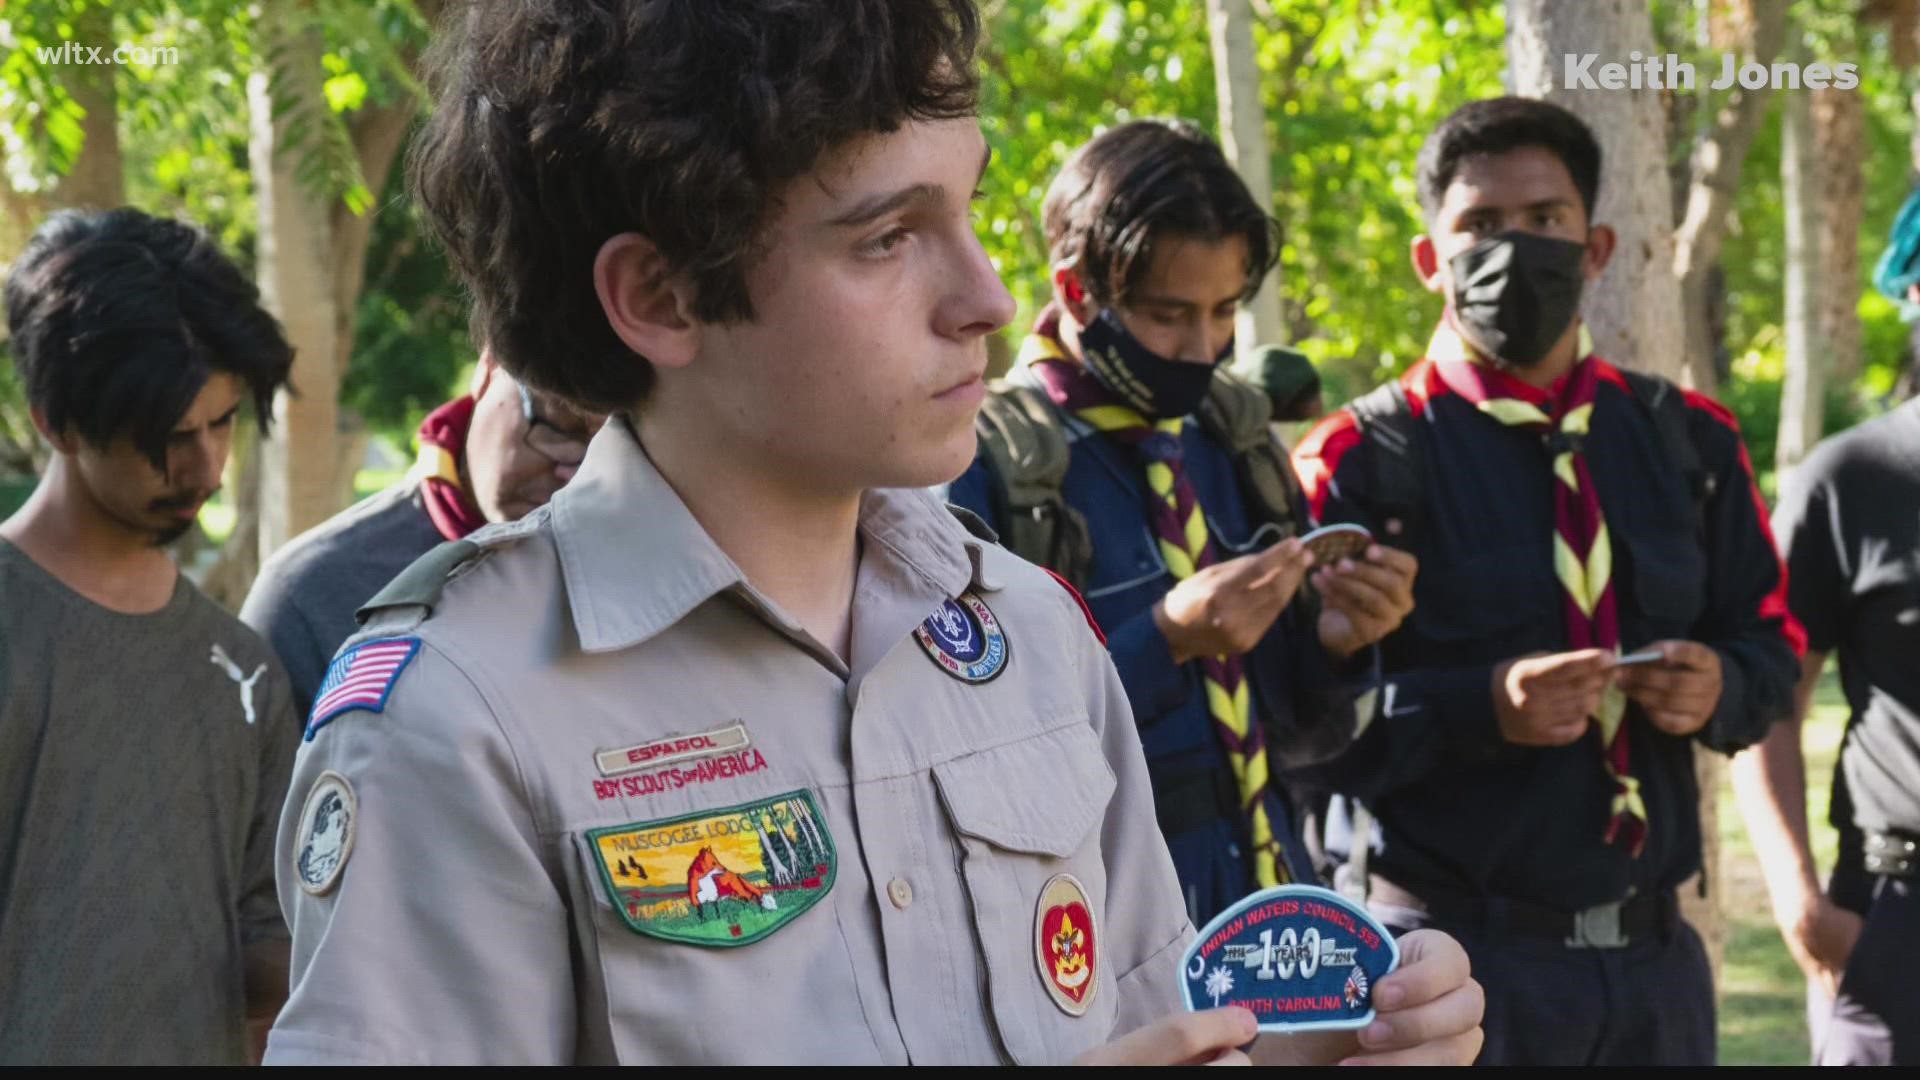 In pursuit of his Eagle Scout Award, an Irmo 17-year-old is helping kids with cancer in Mexico.